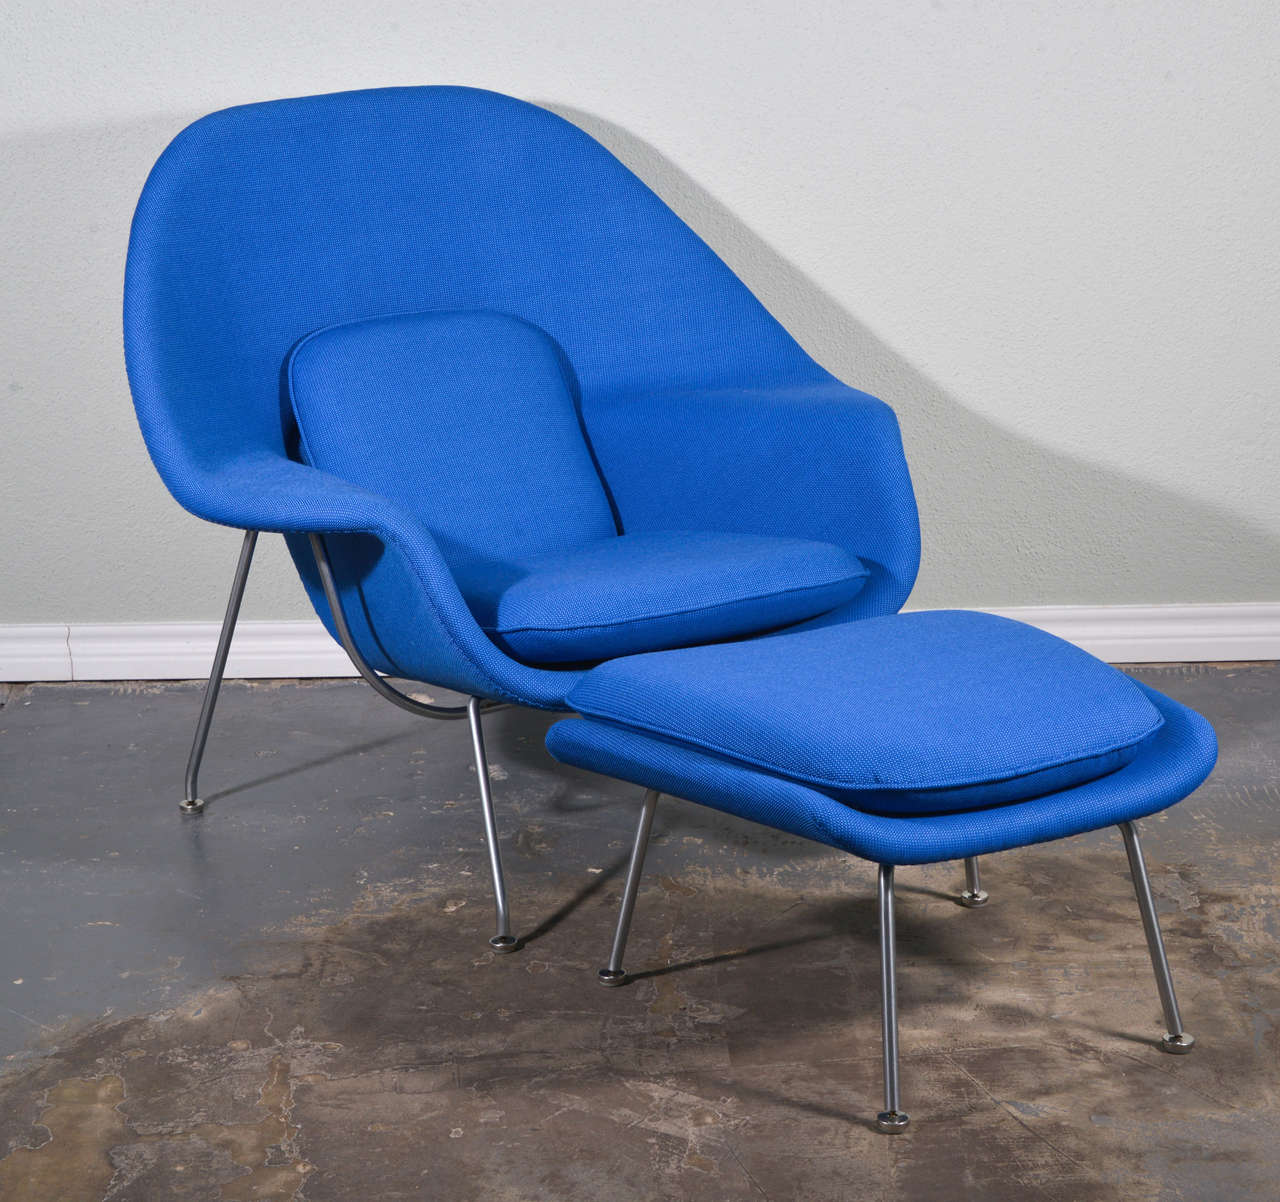 Beautiful vintage Knoll womb chair and ottoman restored in Vintage Alexander Girard Fabric.